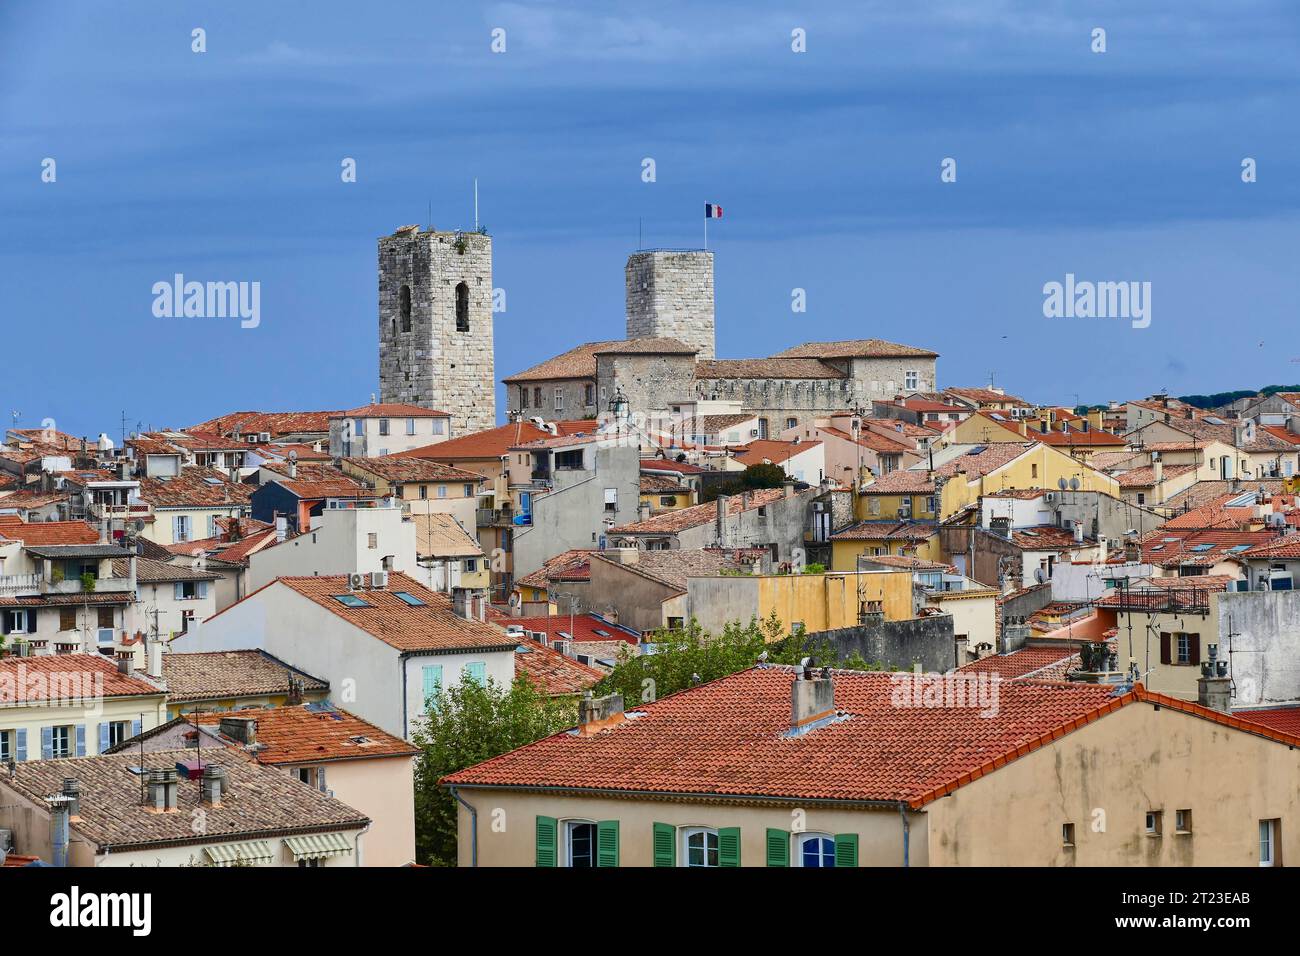 Antibes old town on the French Riviera Stock Photo